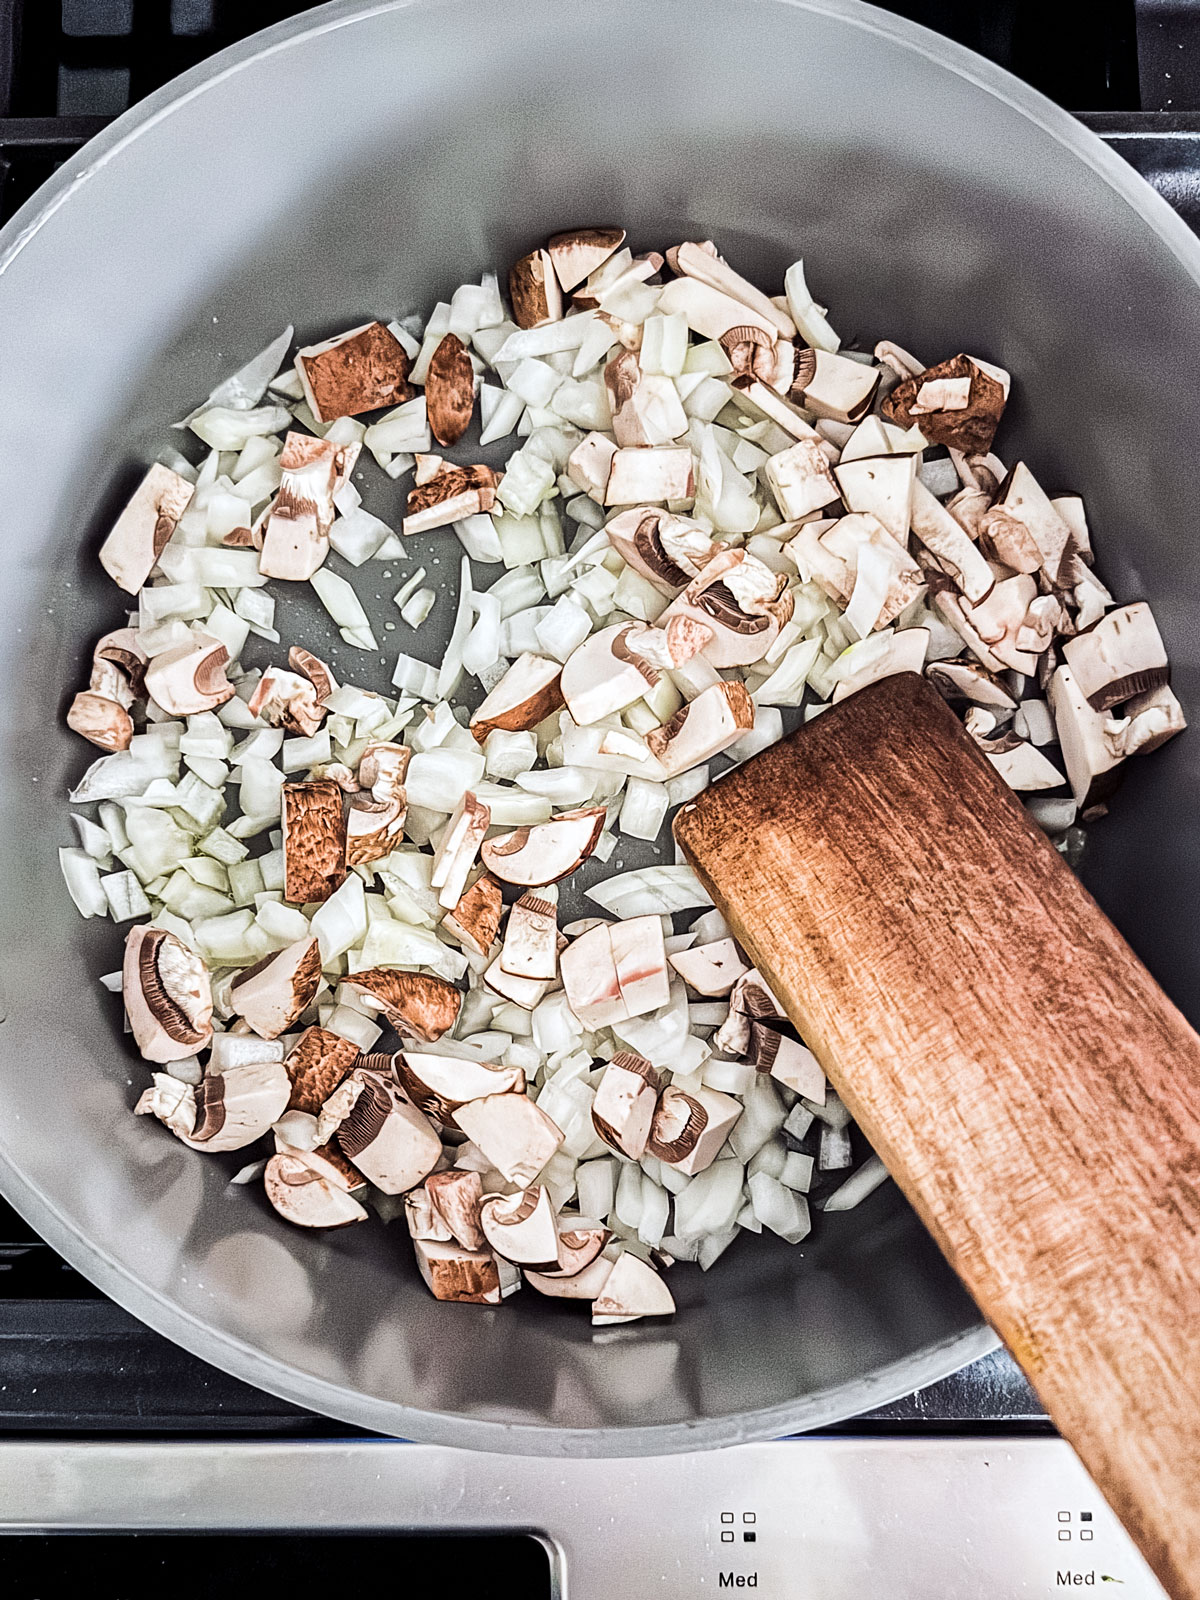 Onions and mushrooms being cooked in a skillet.